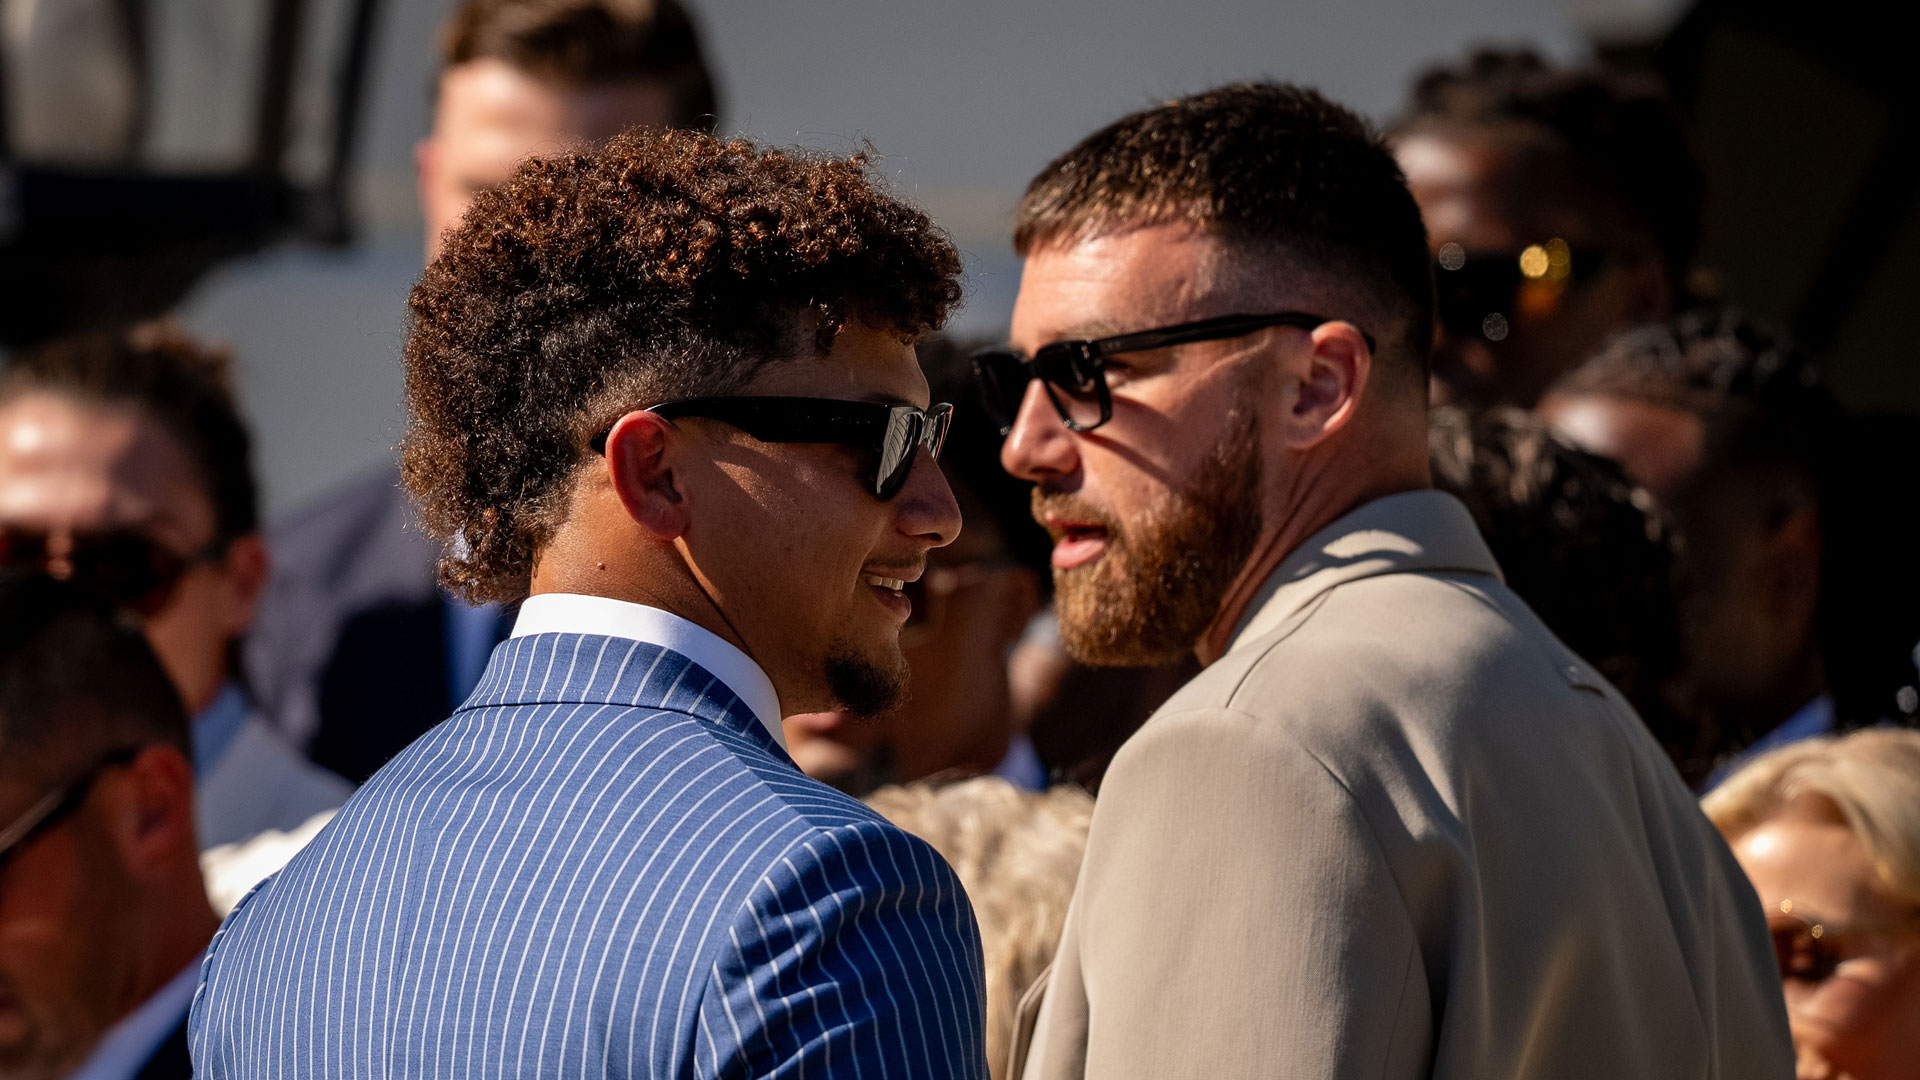 Patrick Mahomes leads NFL in marketing income  but Travis Kelce beaten by two rivals despite Taylor Swift fame [Video]